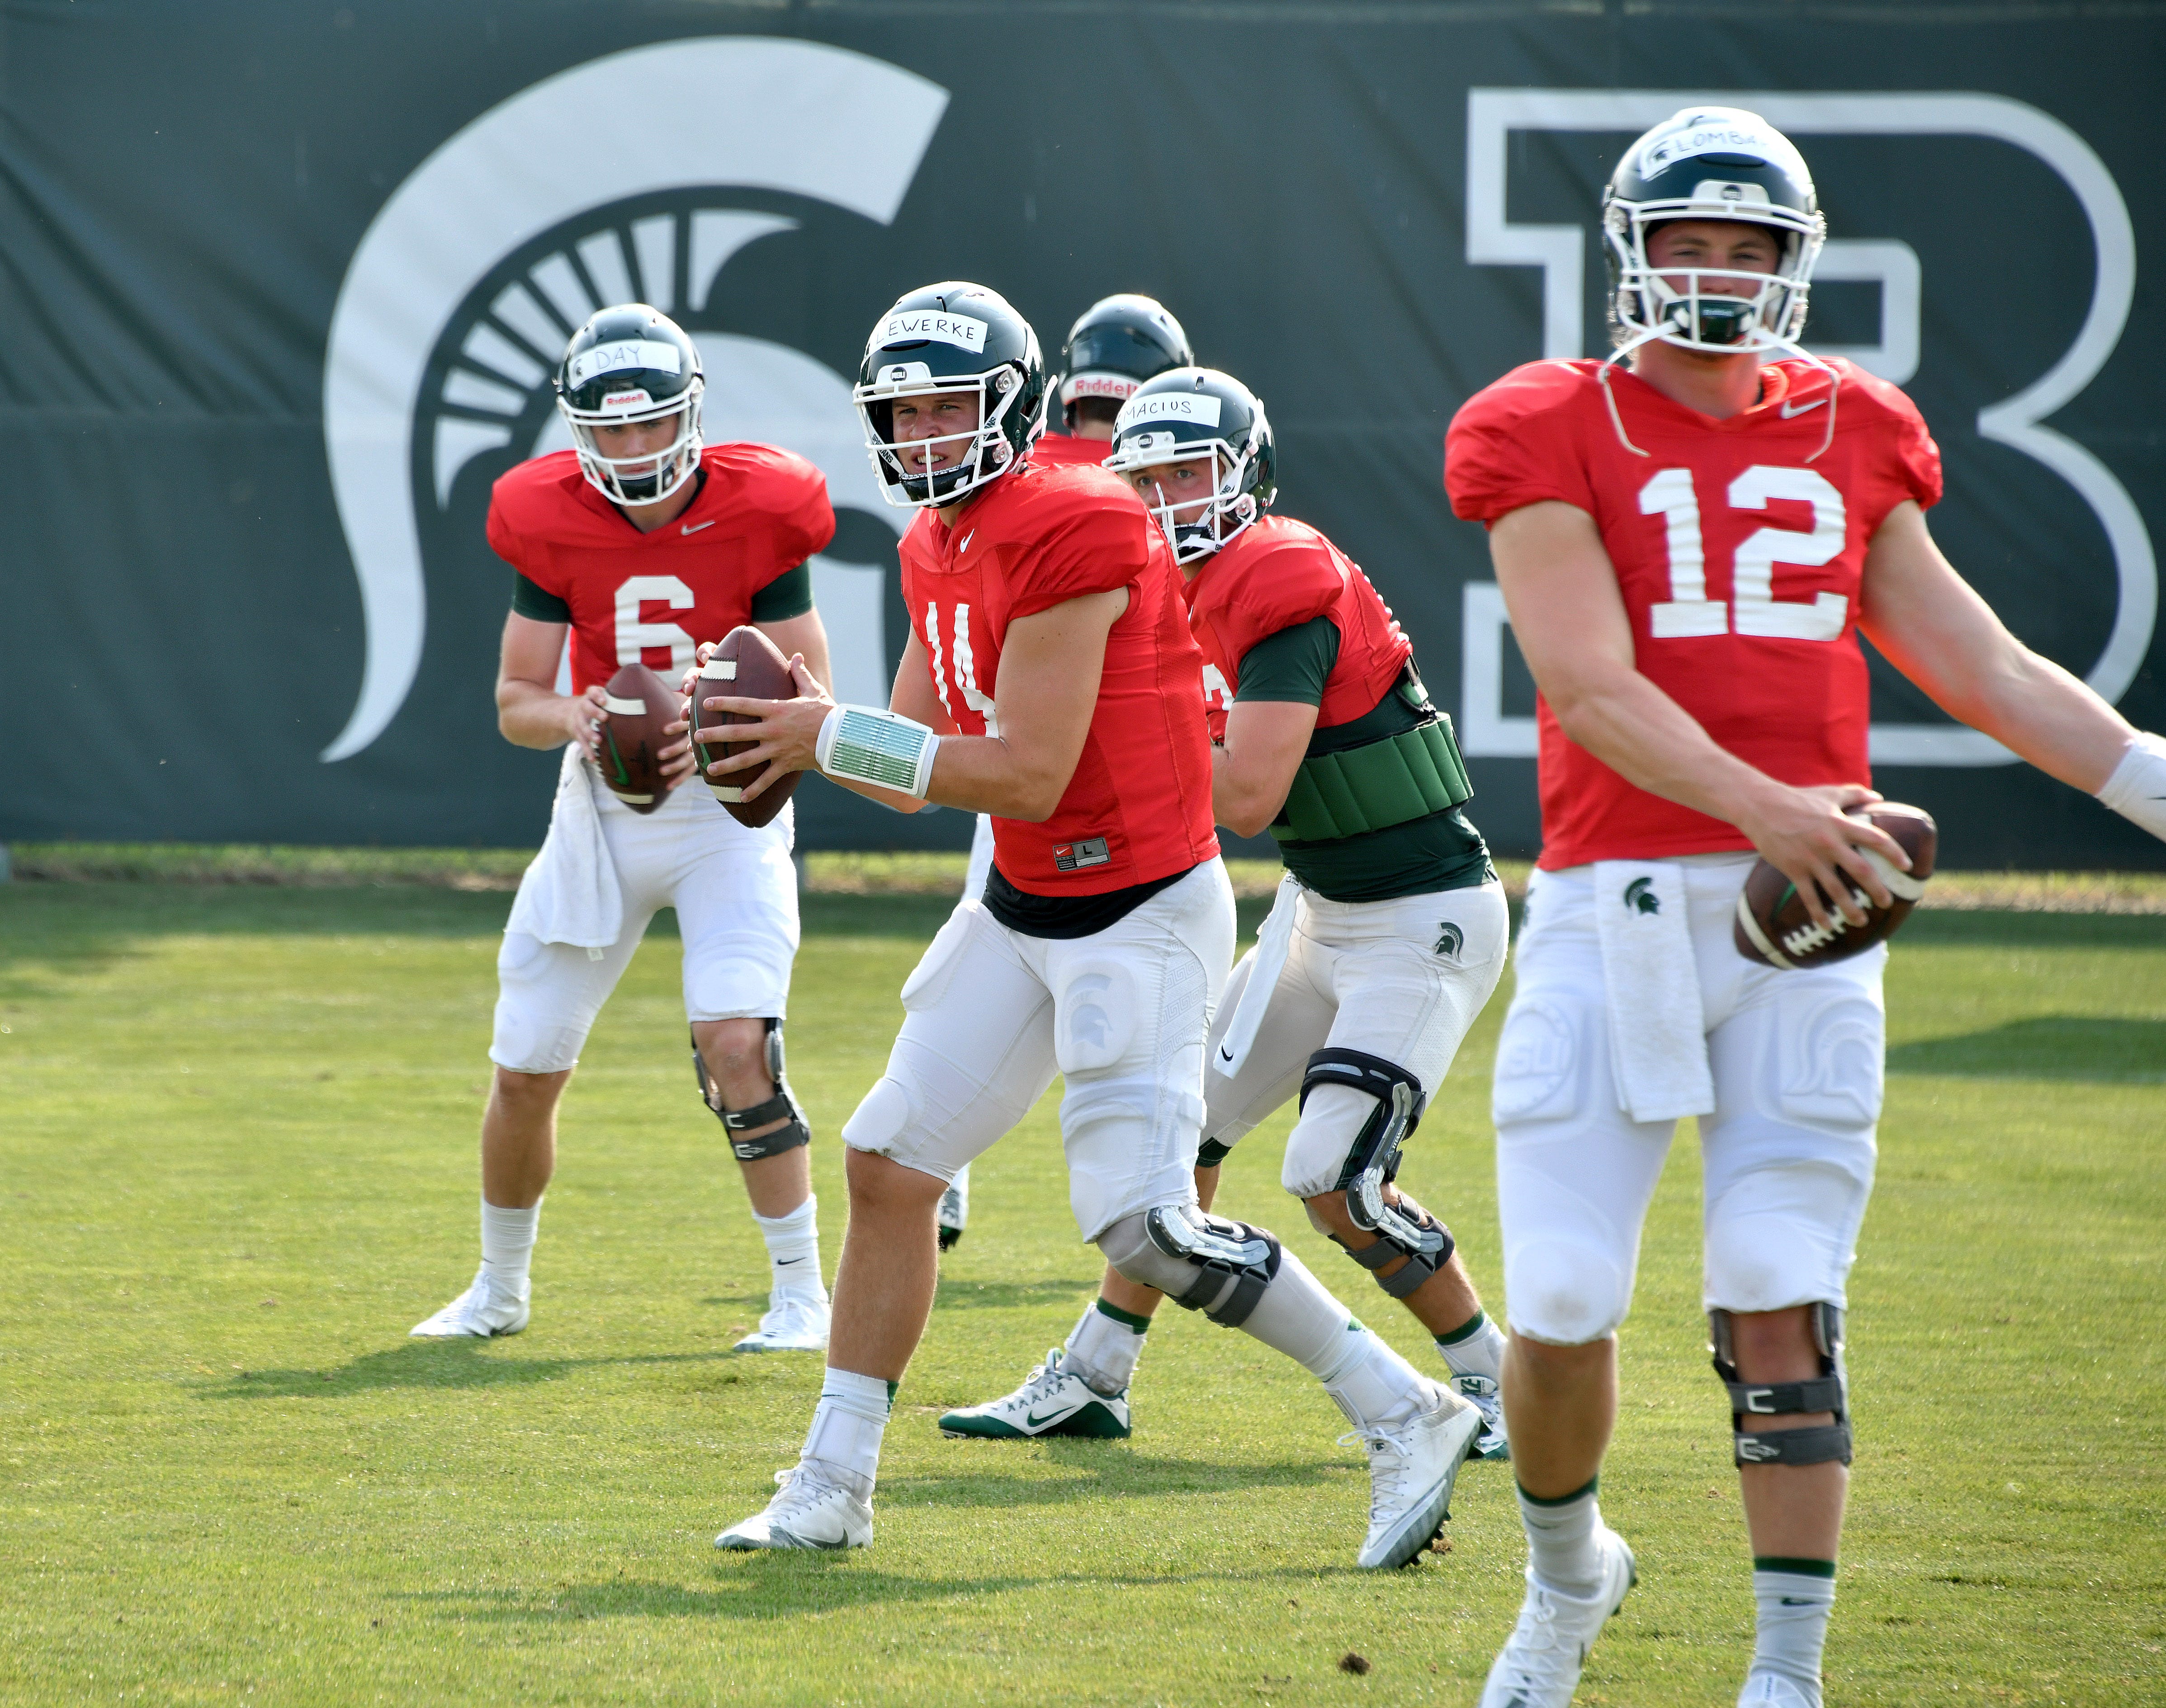 The Michigan State quarterbacks take snaps at the start of Tuesday's practice.